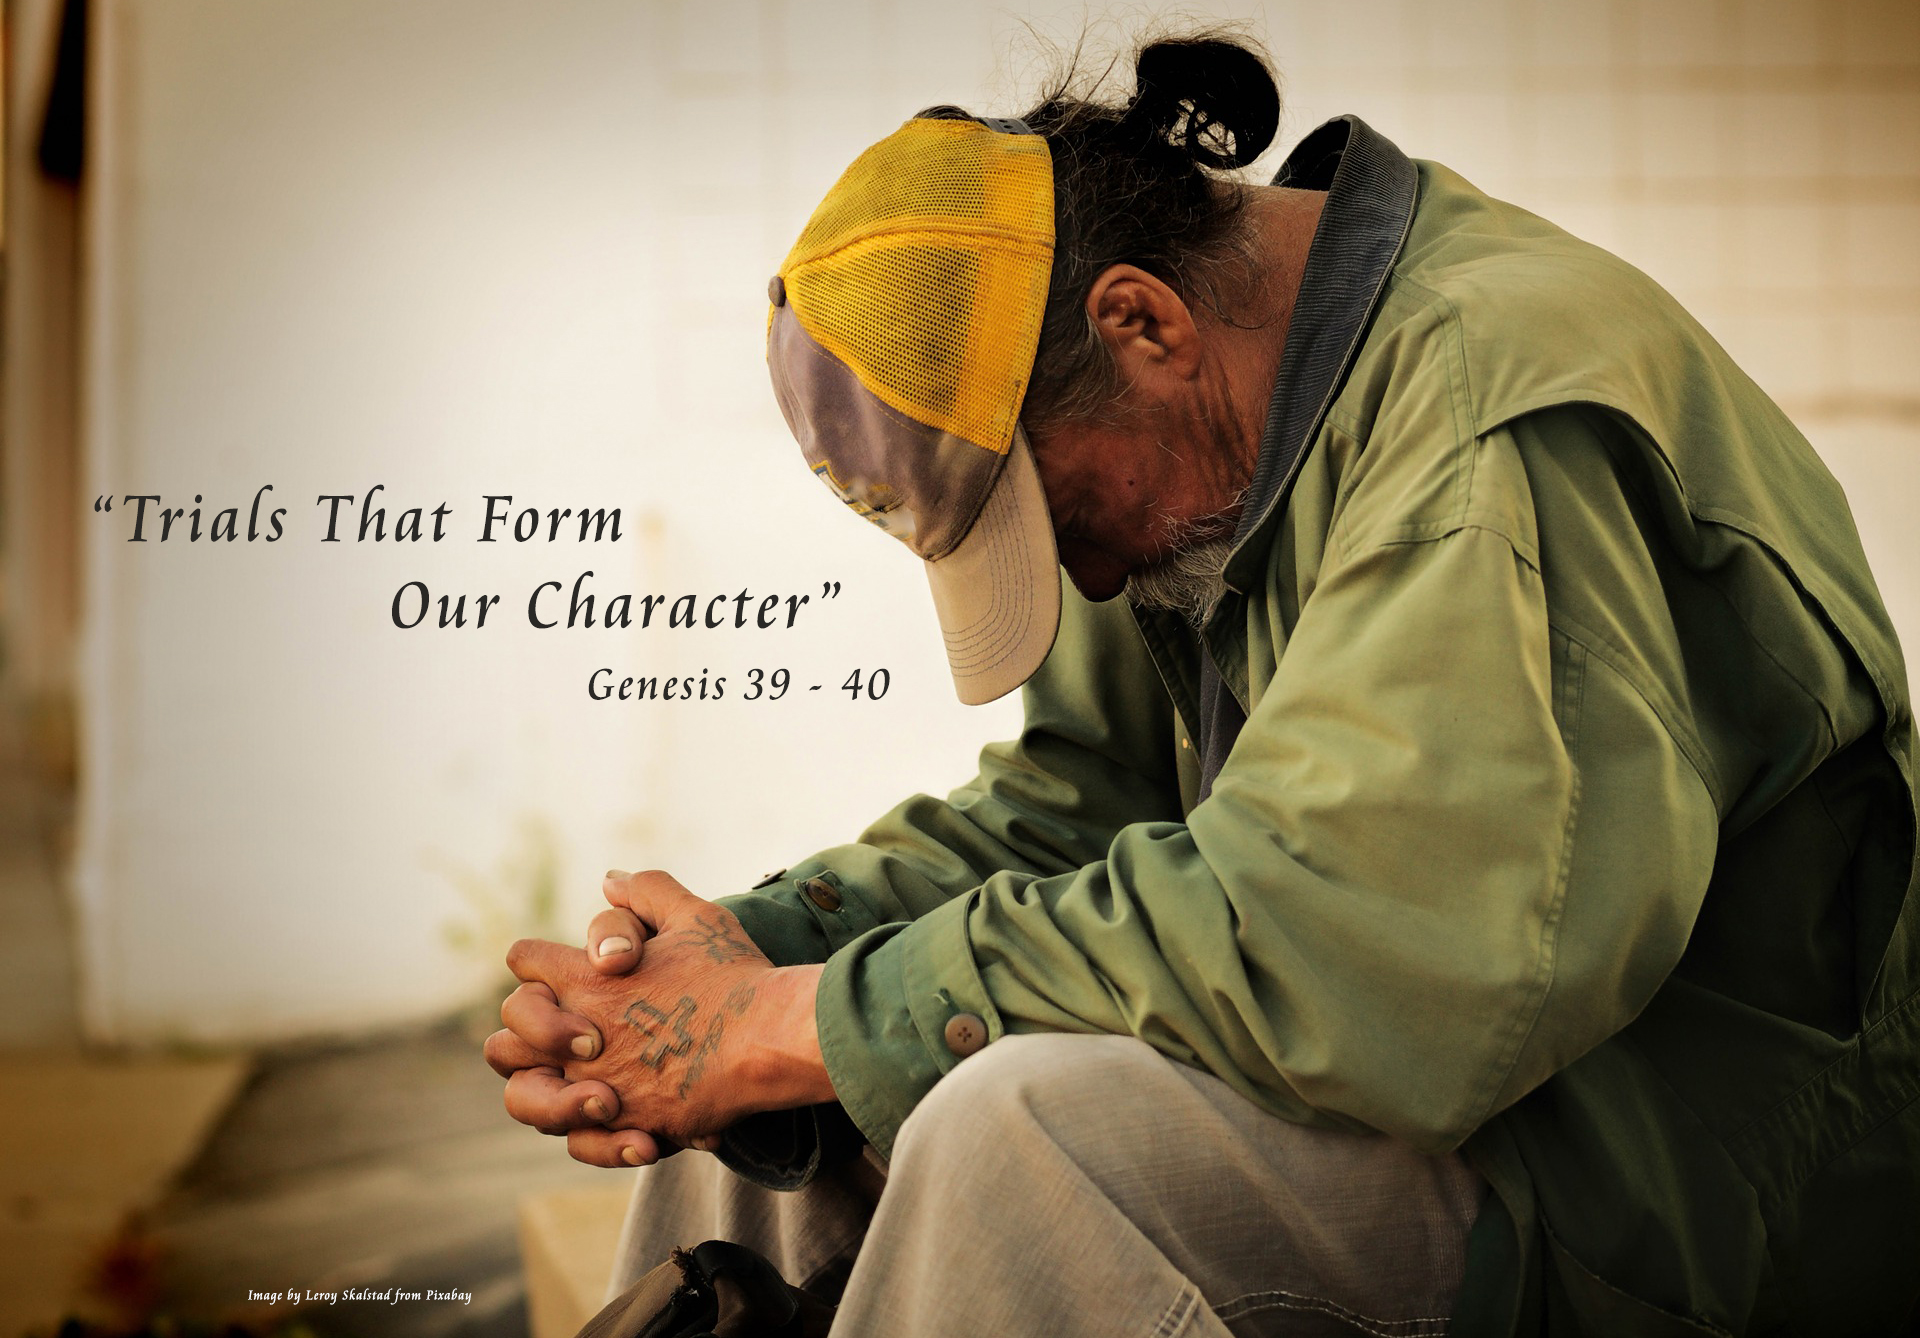 “Trials That Form Our Character”